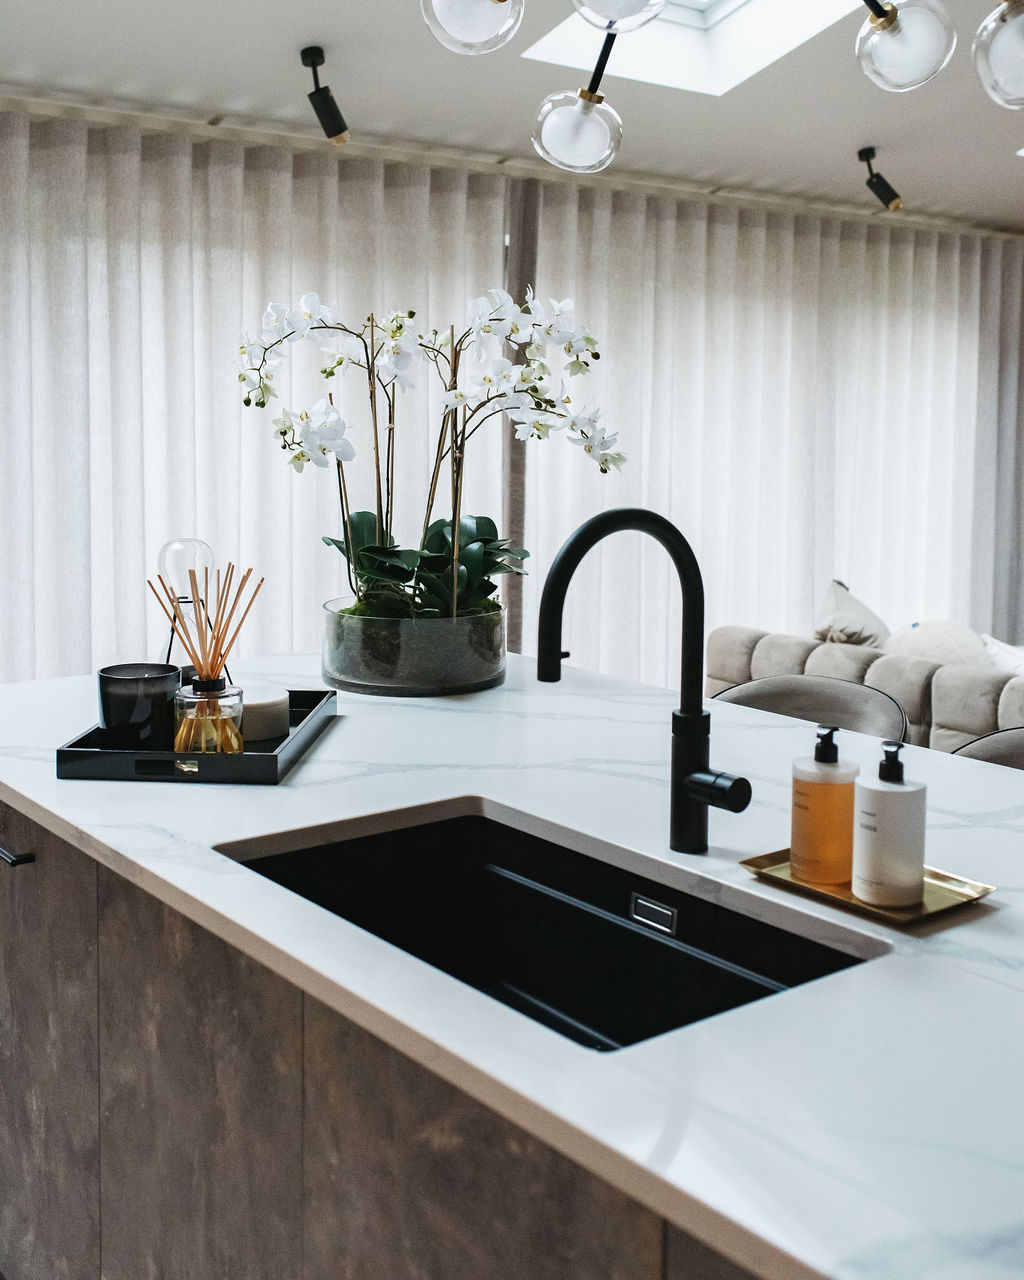 the interior design of a kitchen with black sink and taps